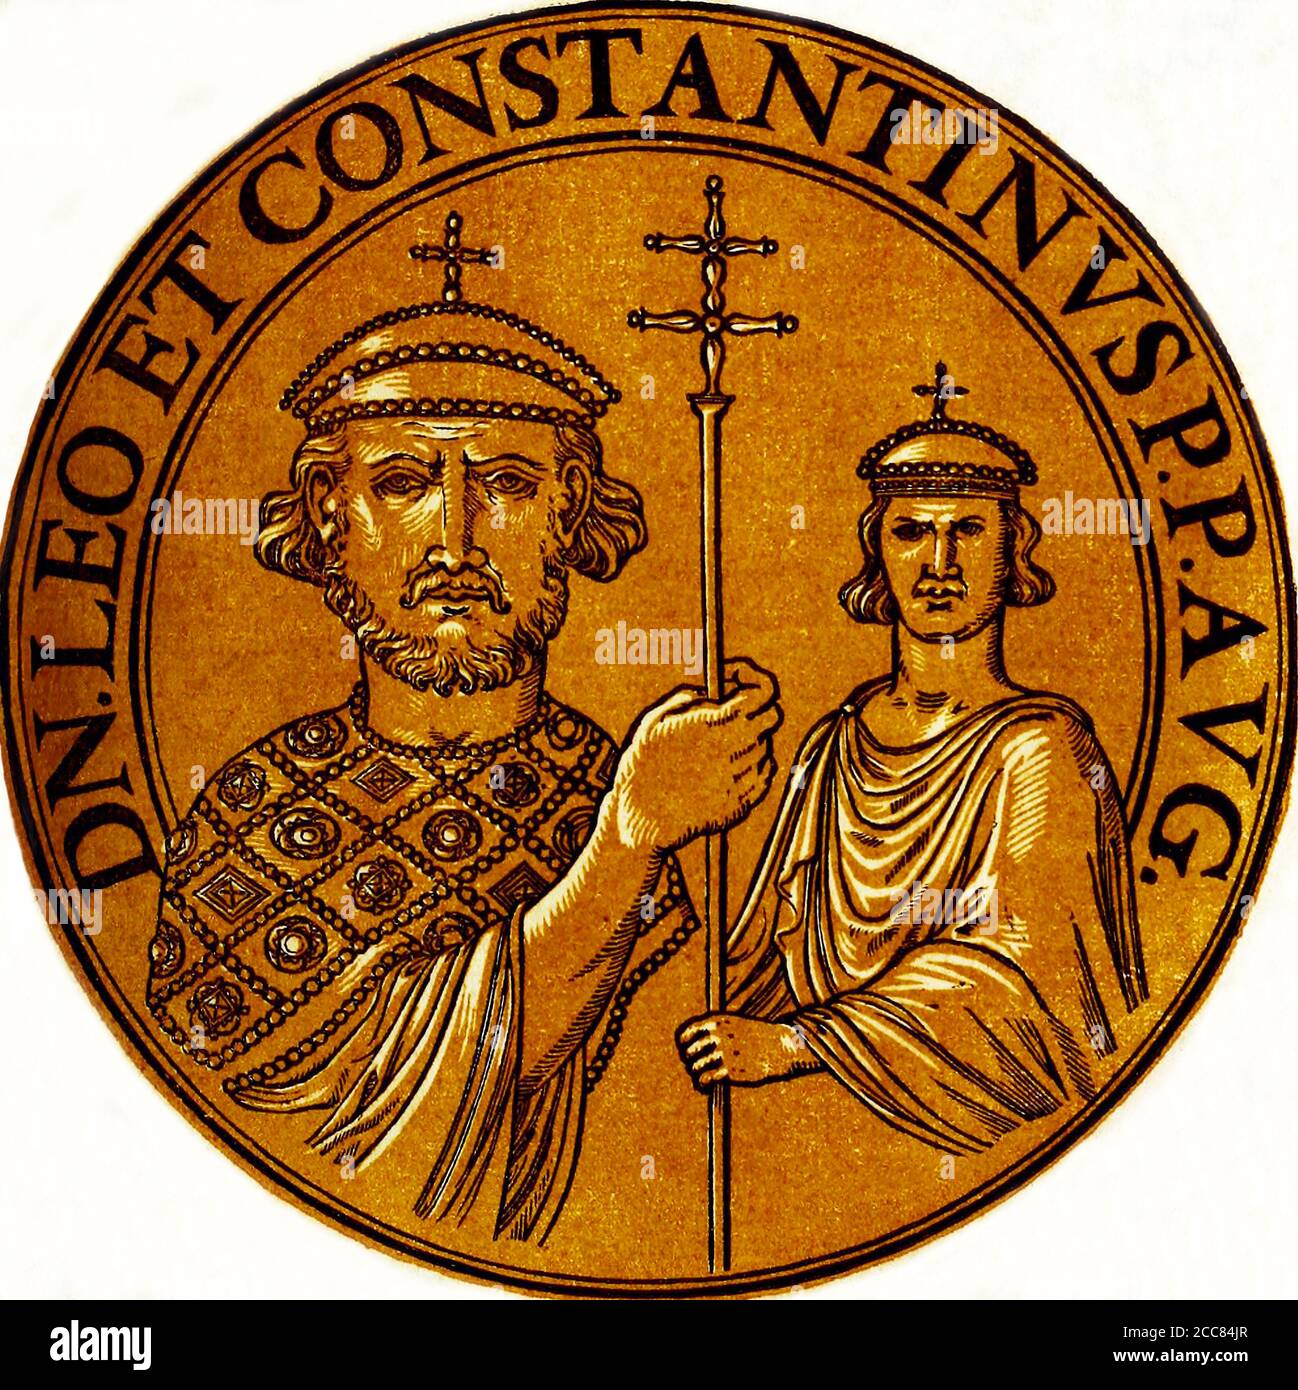 Turkey / Byzantium: Leo III (685-741) and Constantine V (718-775), Byzantine emperors, from the book Icones imperatorvm romanorvm (Icons of Roman Emperors), Antwerp, c. 1645. Leo III served under Emperor Justinian II when the emperor was attempting to reclaim his throne. After Justinian's victory, Leo was sent to fight against the Umayyad Caliphate, and was appointed as overall commander by Emperor Anastasius II. Leo became ambitious, and he conspired to overthrow the new Emperor Theodosius III. Entering Constantinople in 717 he forced Theodosius to abdicate. He was succeeded by his son and he Stock Photo